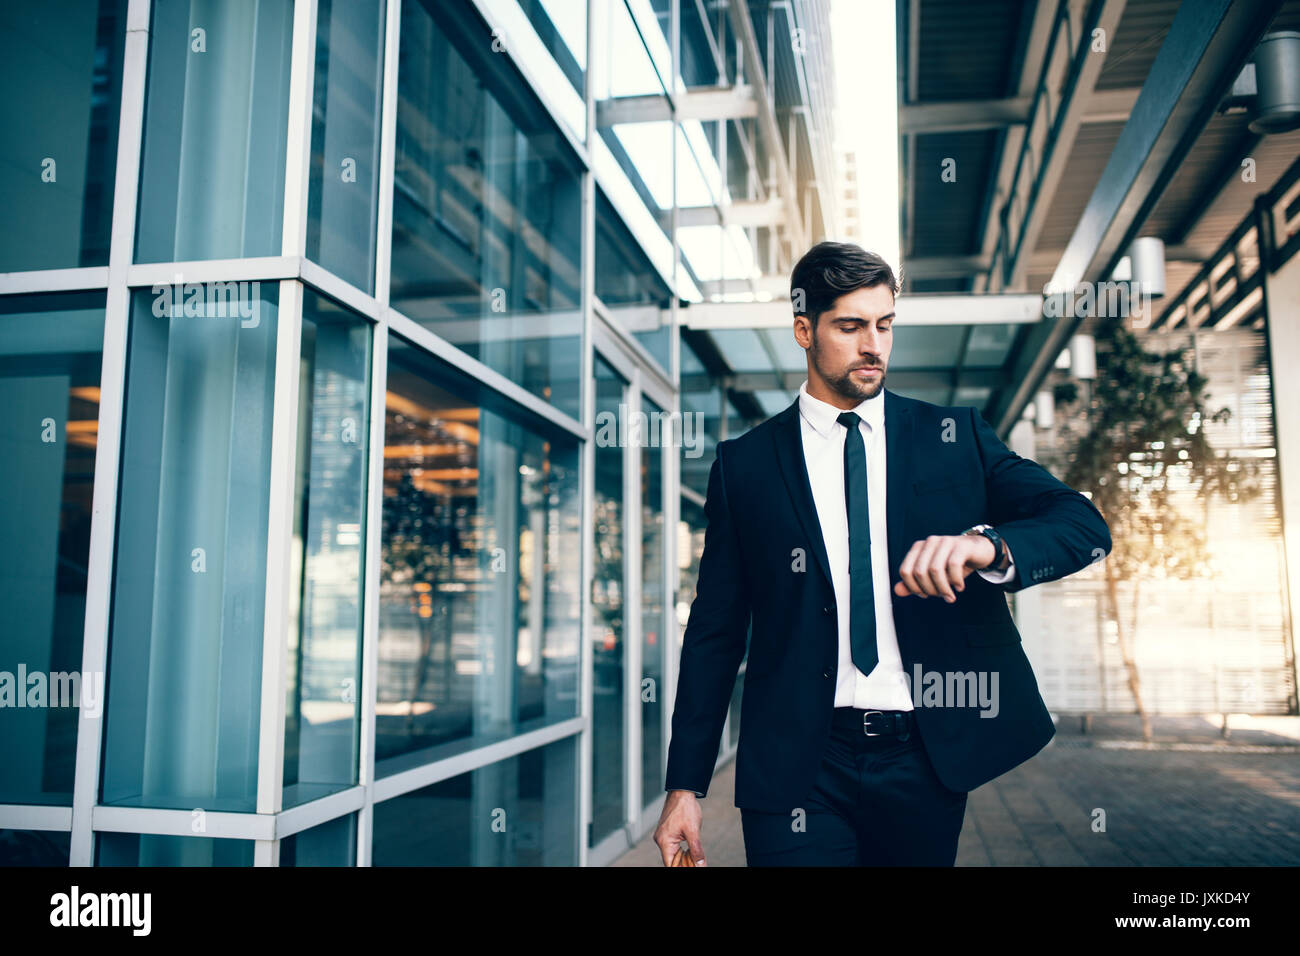 Business traveler checking time on his wristwatch at airport. Young businessman looking at his watch while walking inside public transportation buildi Stock Photo